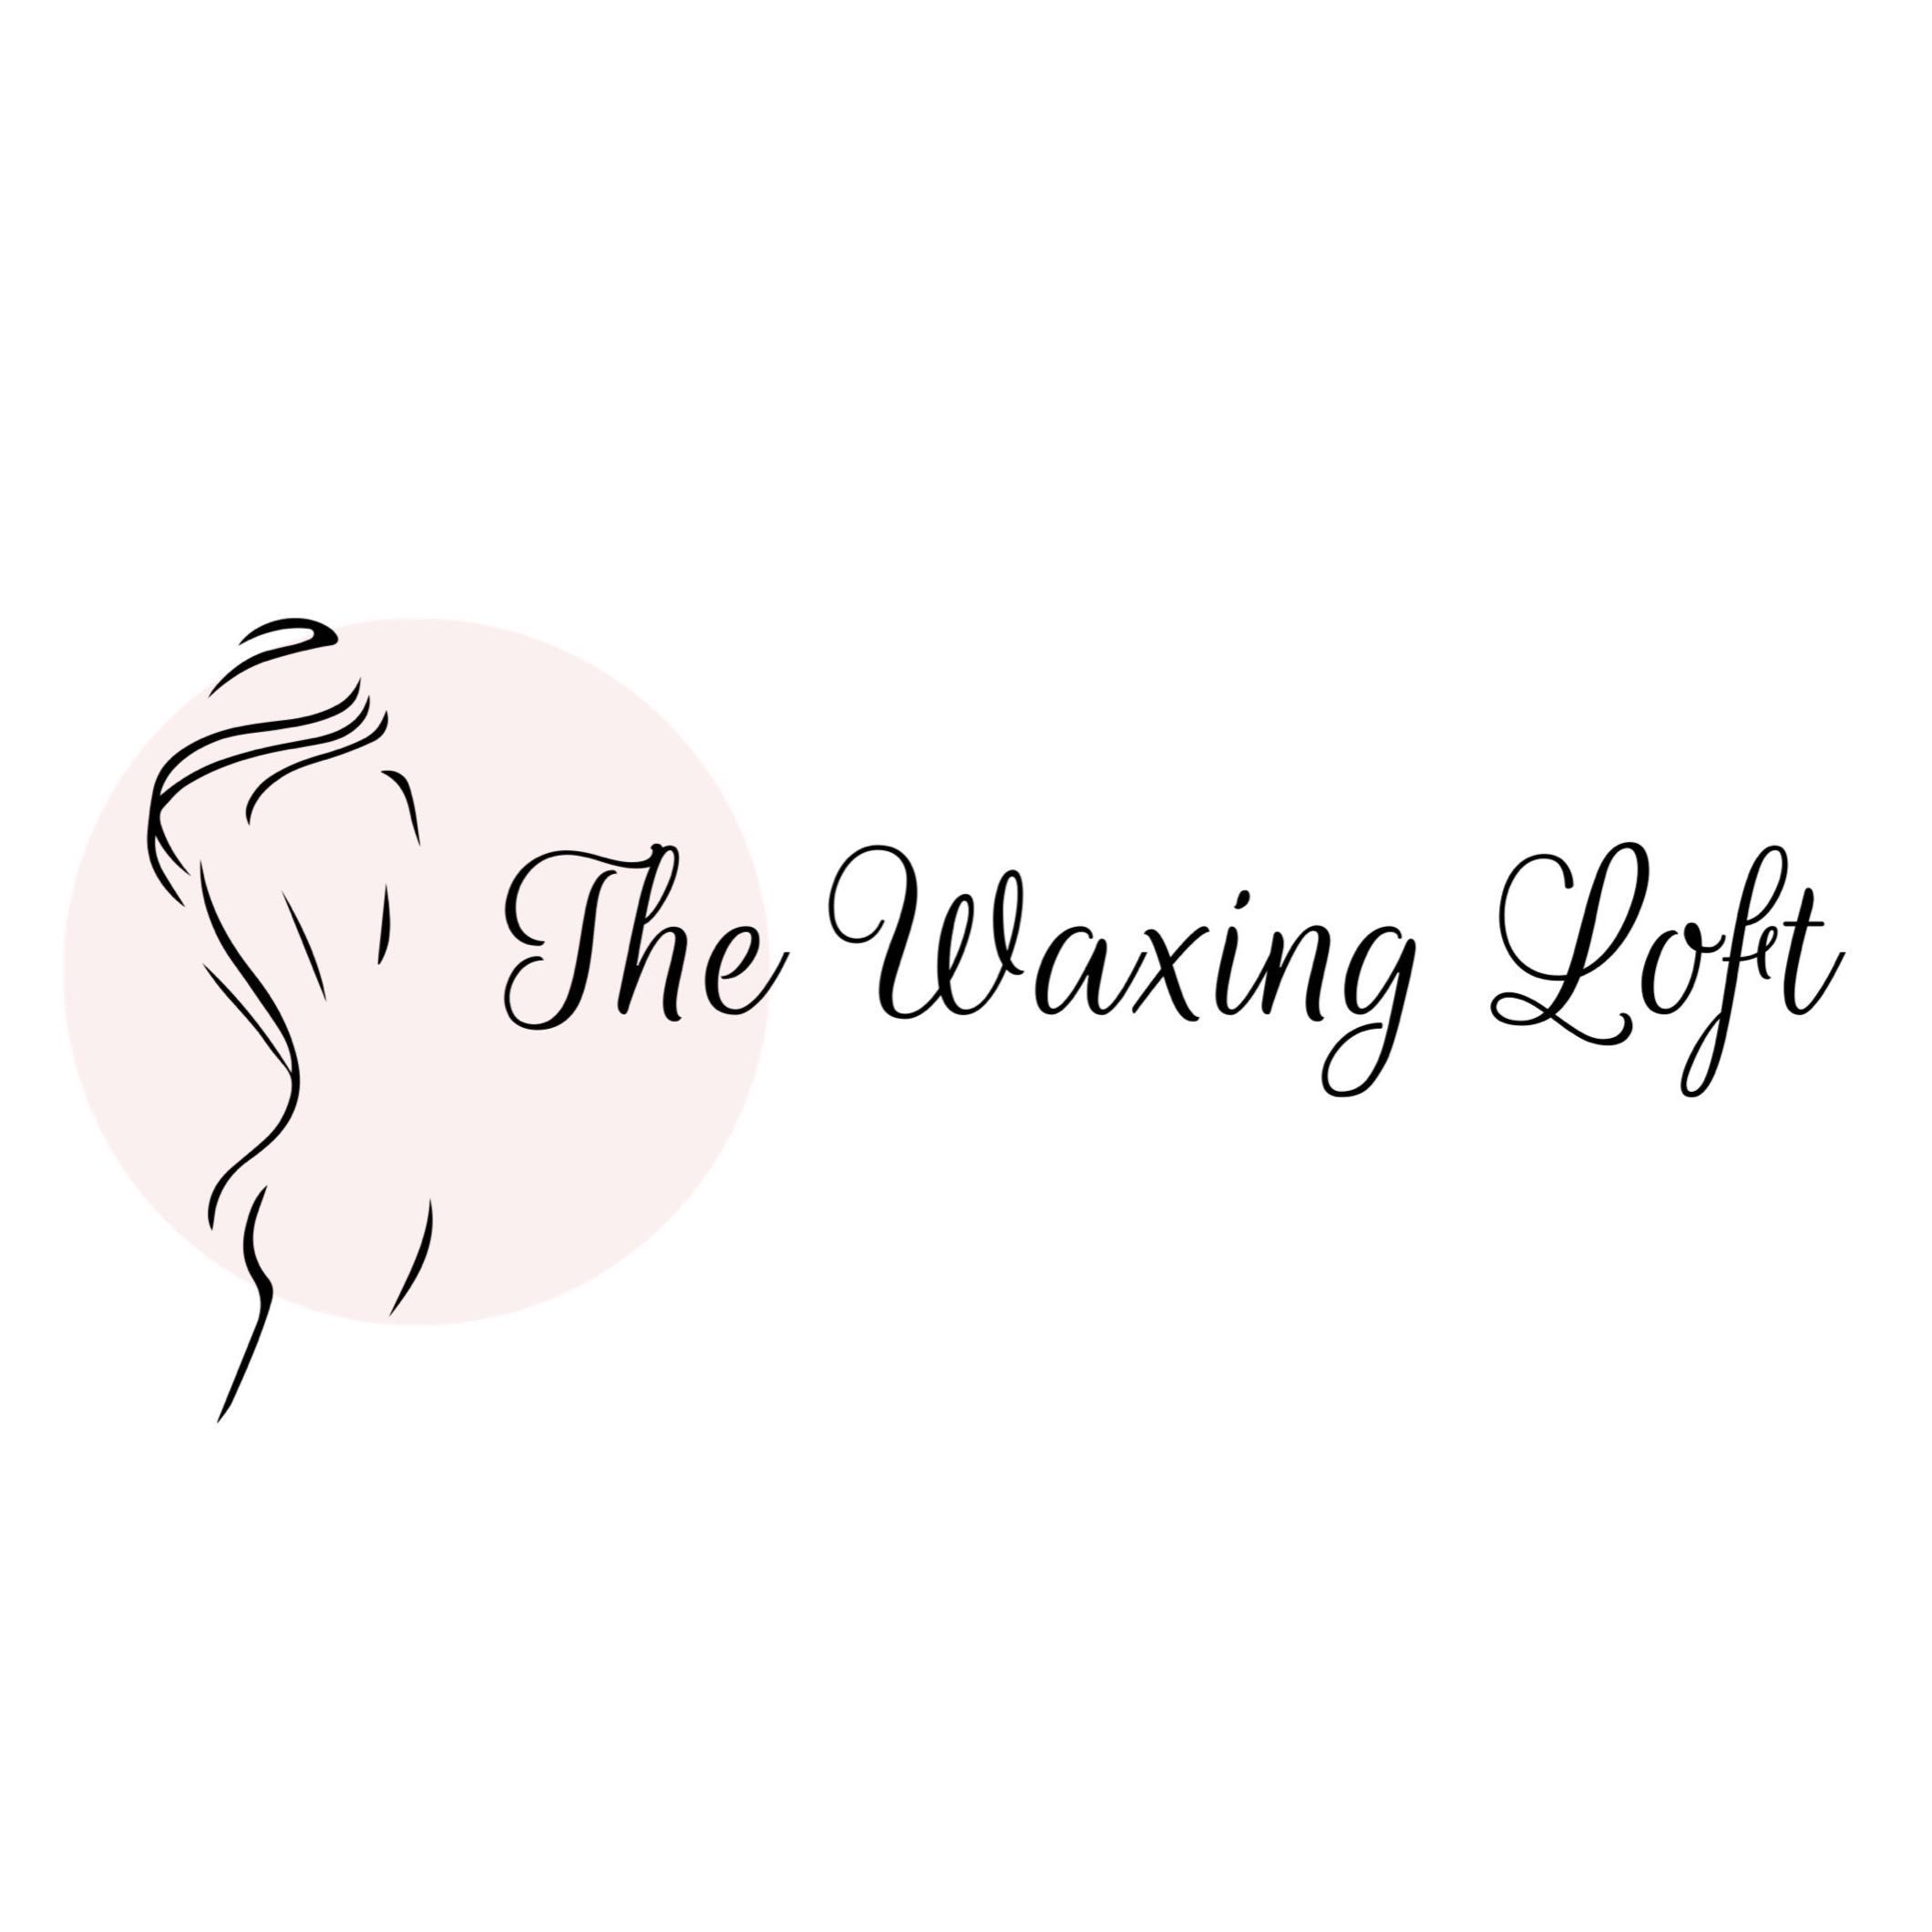 The Waxing Loft, 63 E water street, Chillicothe, 45601